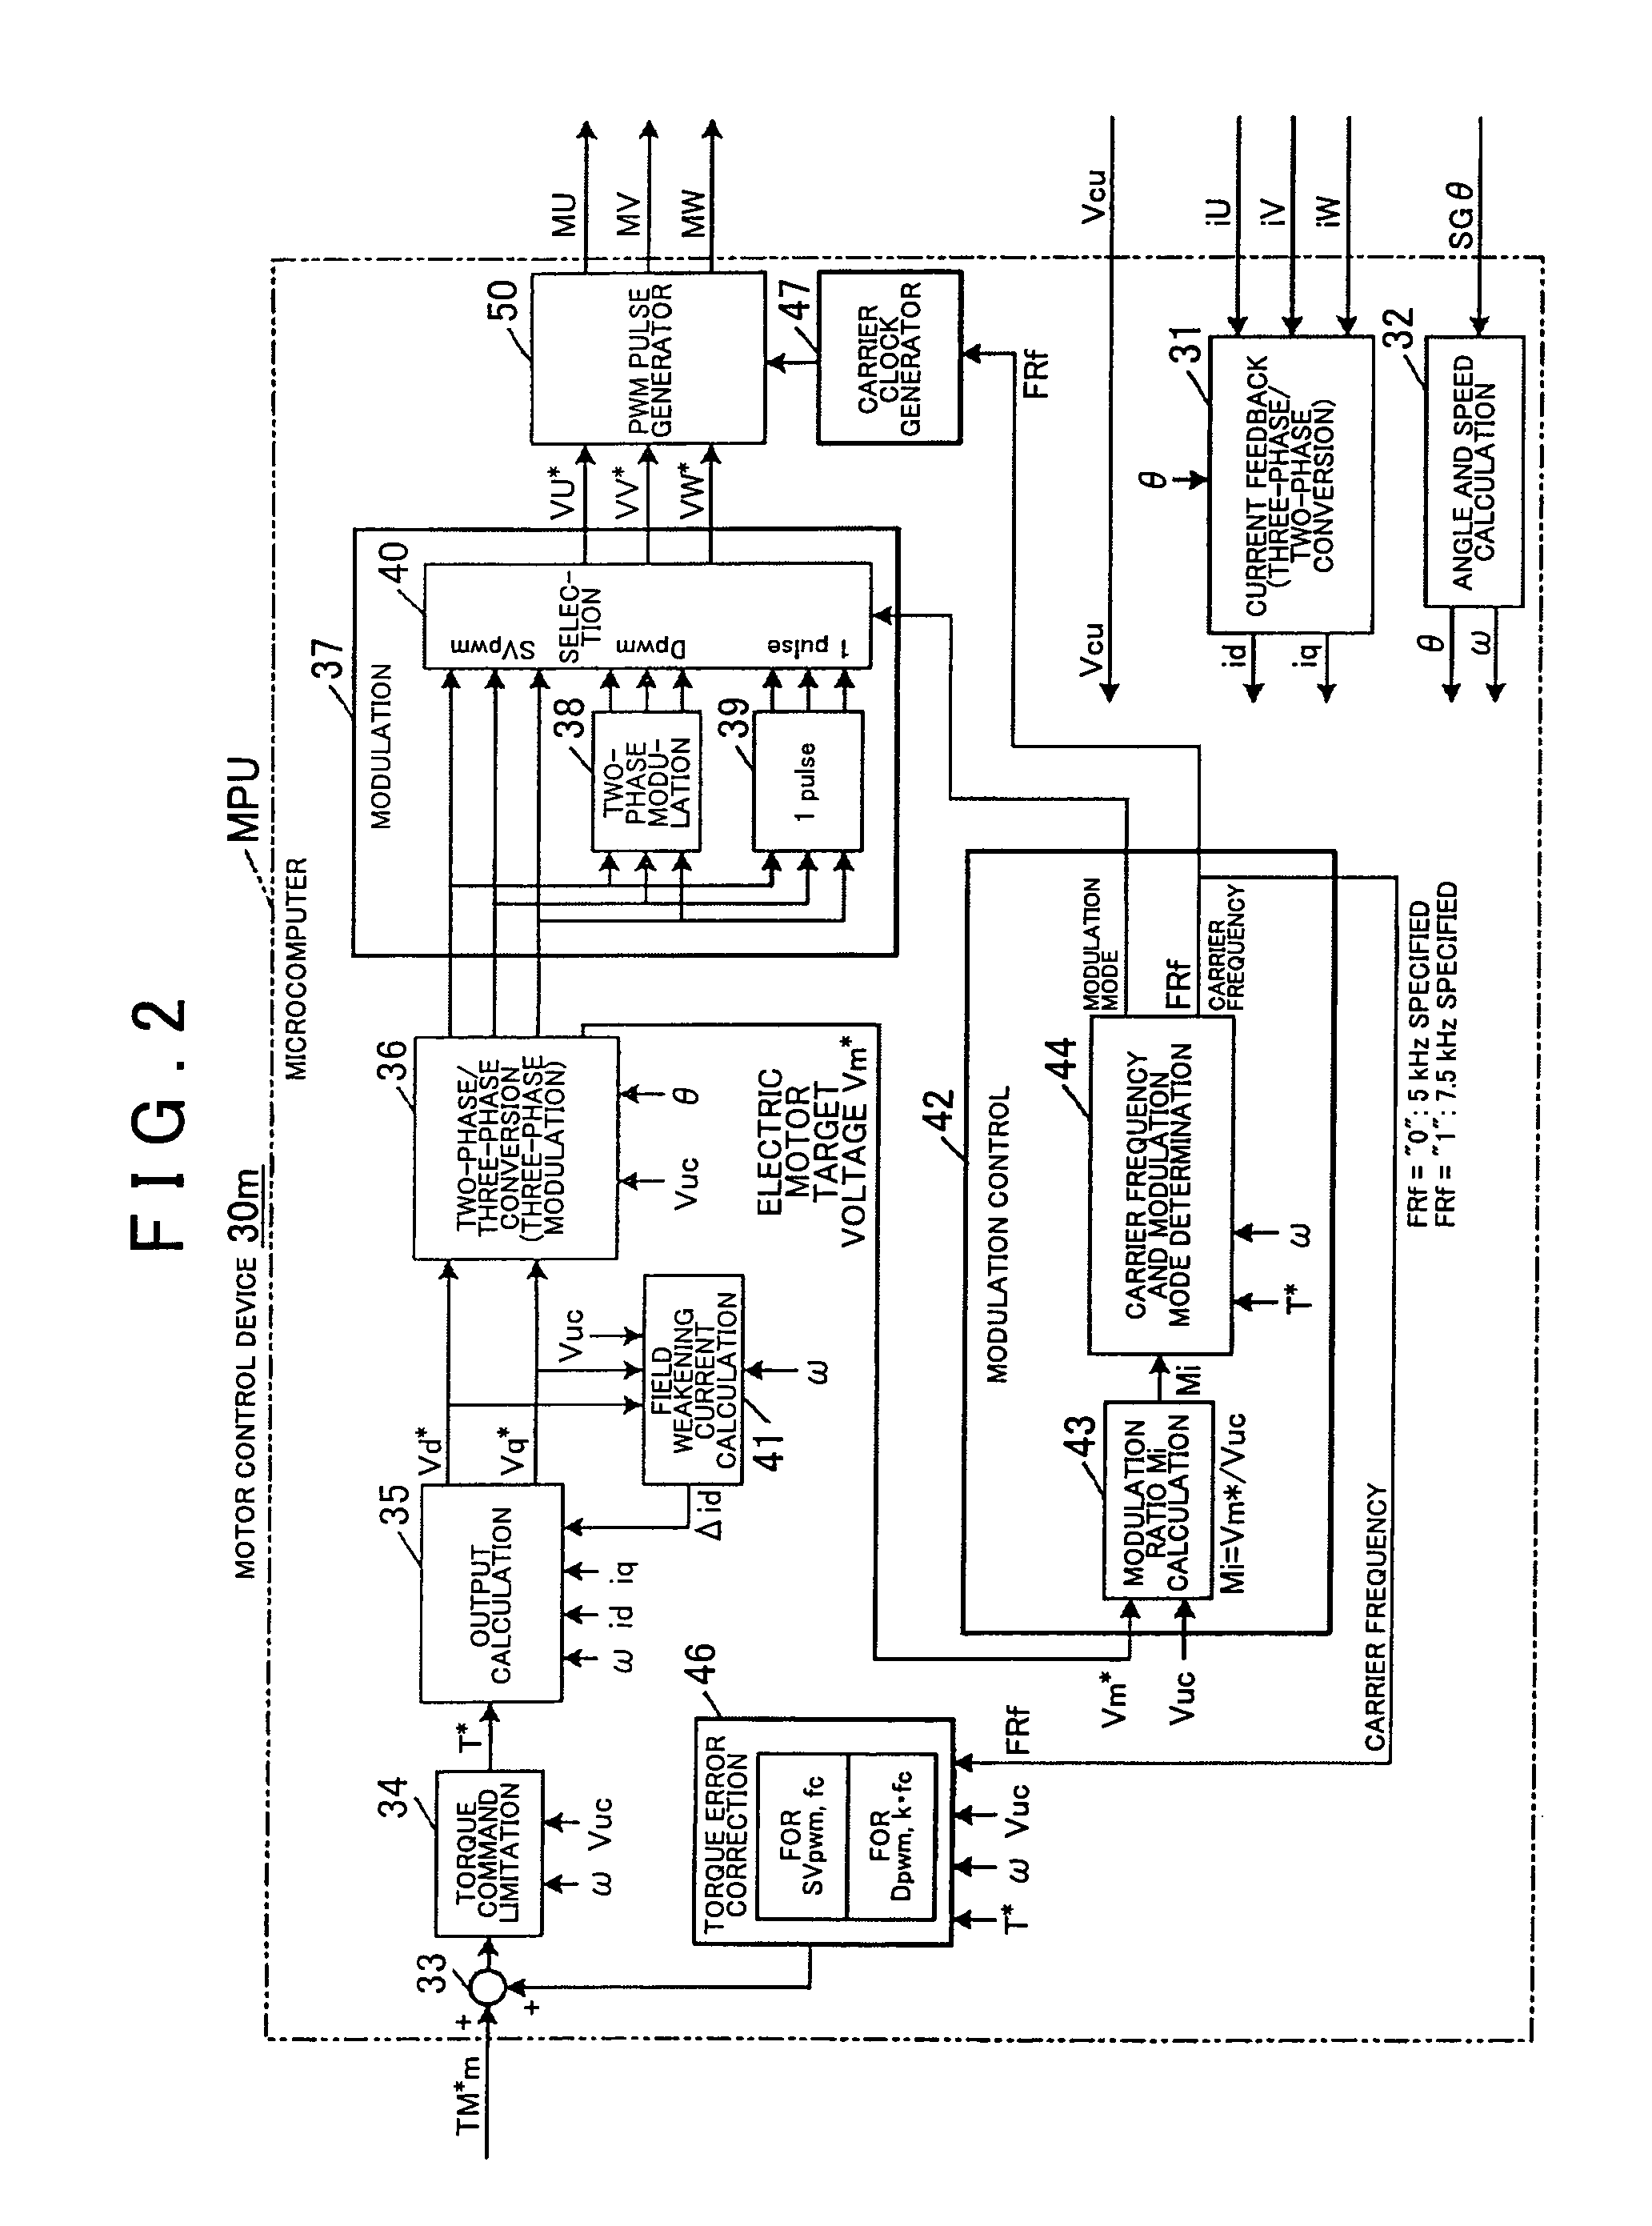 Electric motor control device, electric vehicle, and hybrid electric vehicle